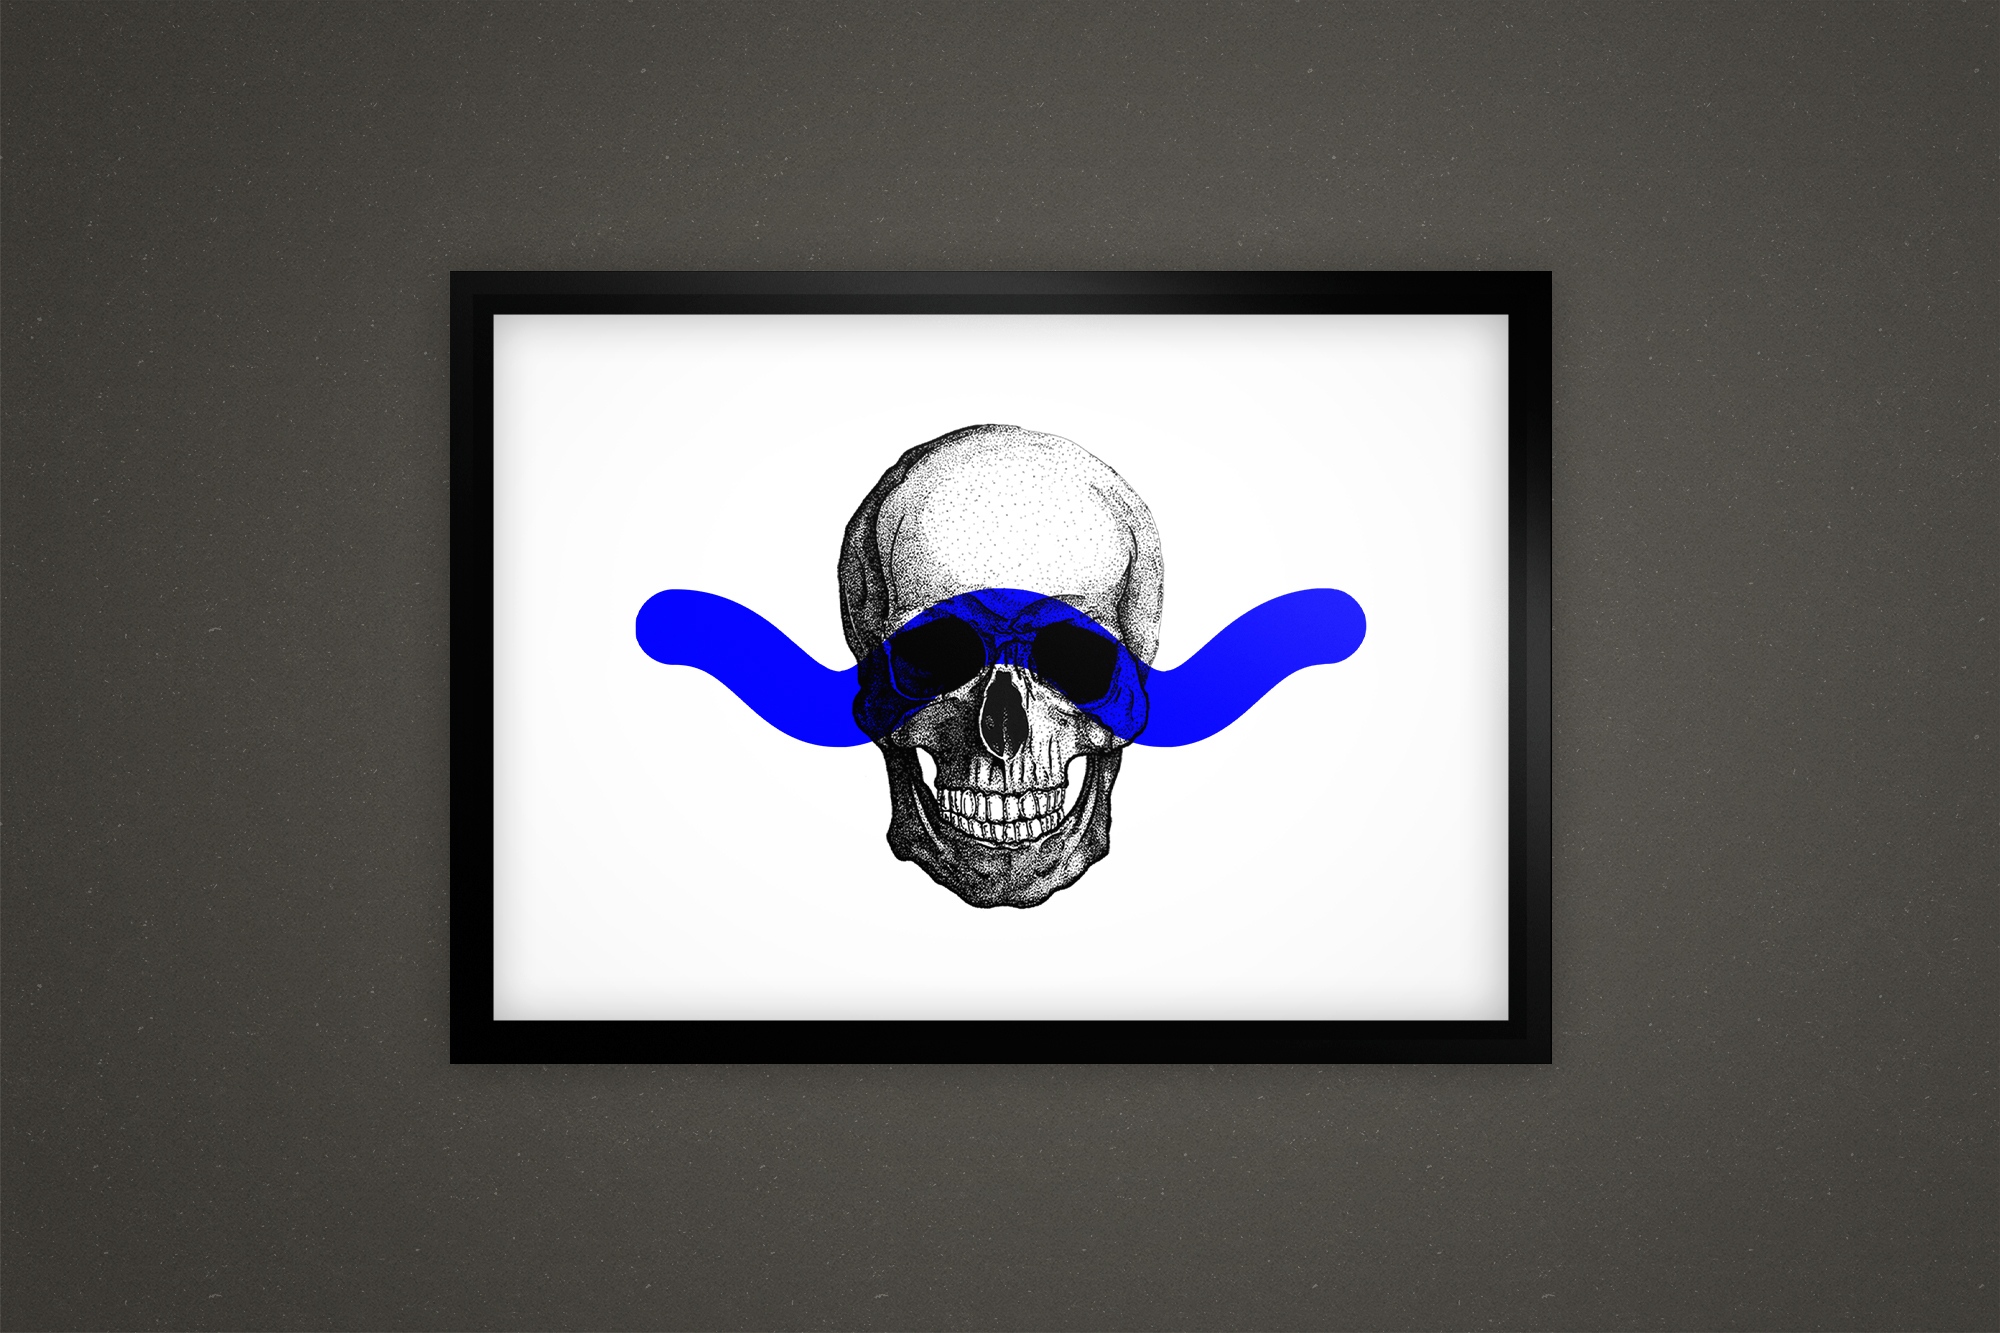 Skull's Head Illustration board on frame on the wall with blue